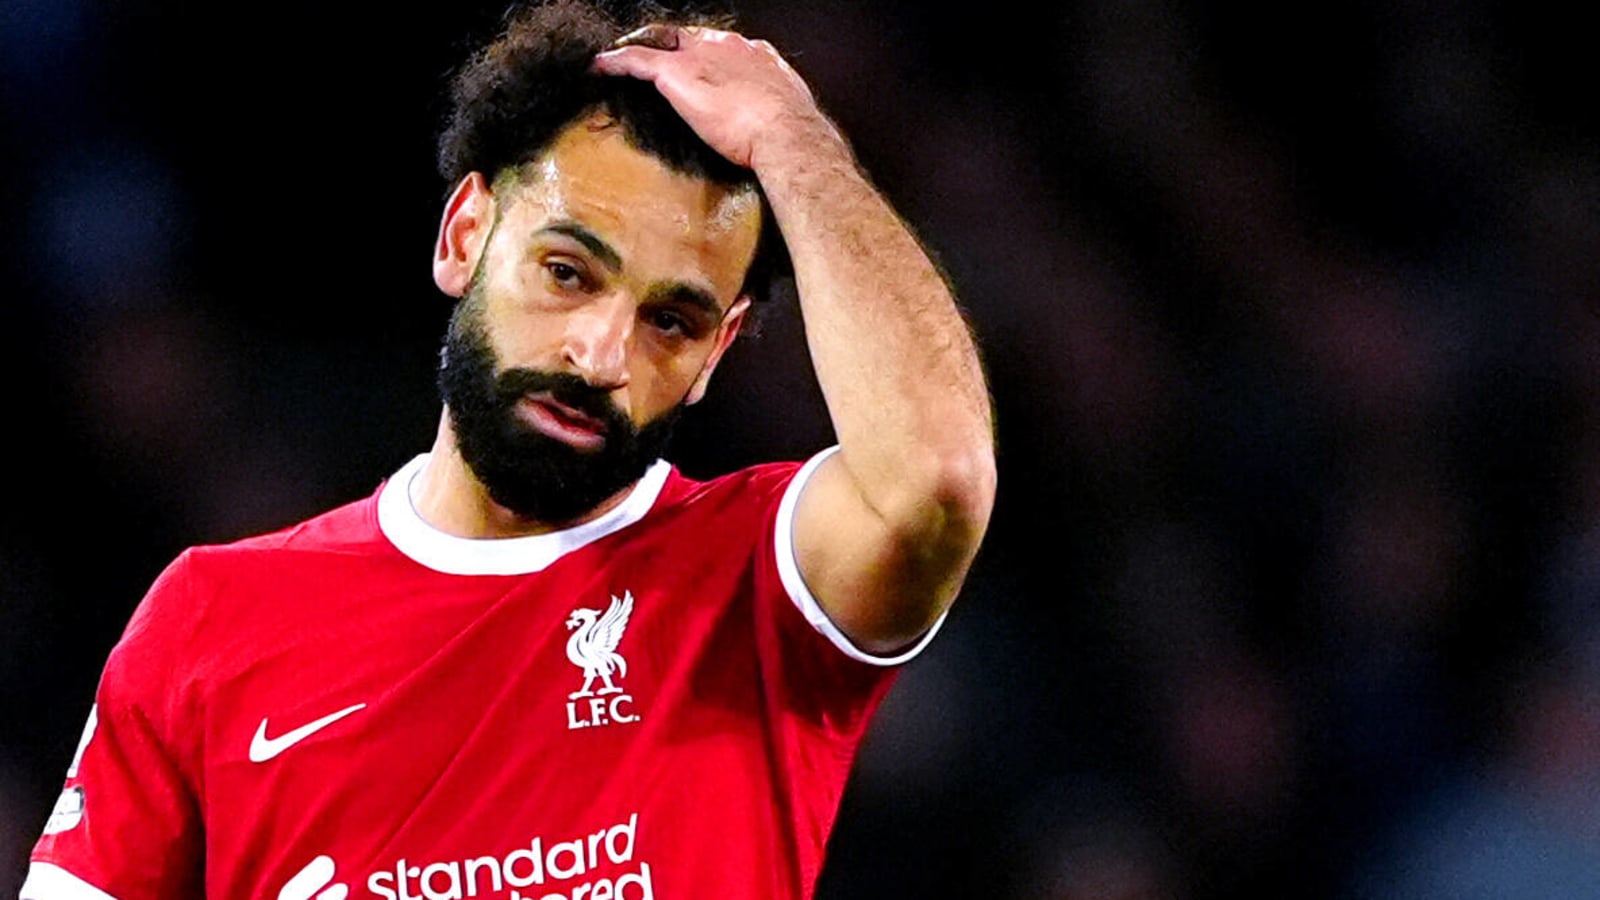 ‘You don’t expect that’ – Neville couldn’t believe what he saw from Liverpool stalwart tonight